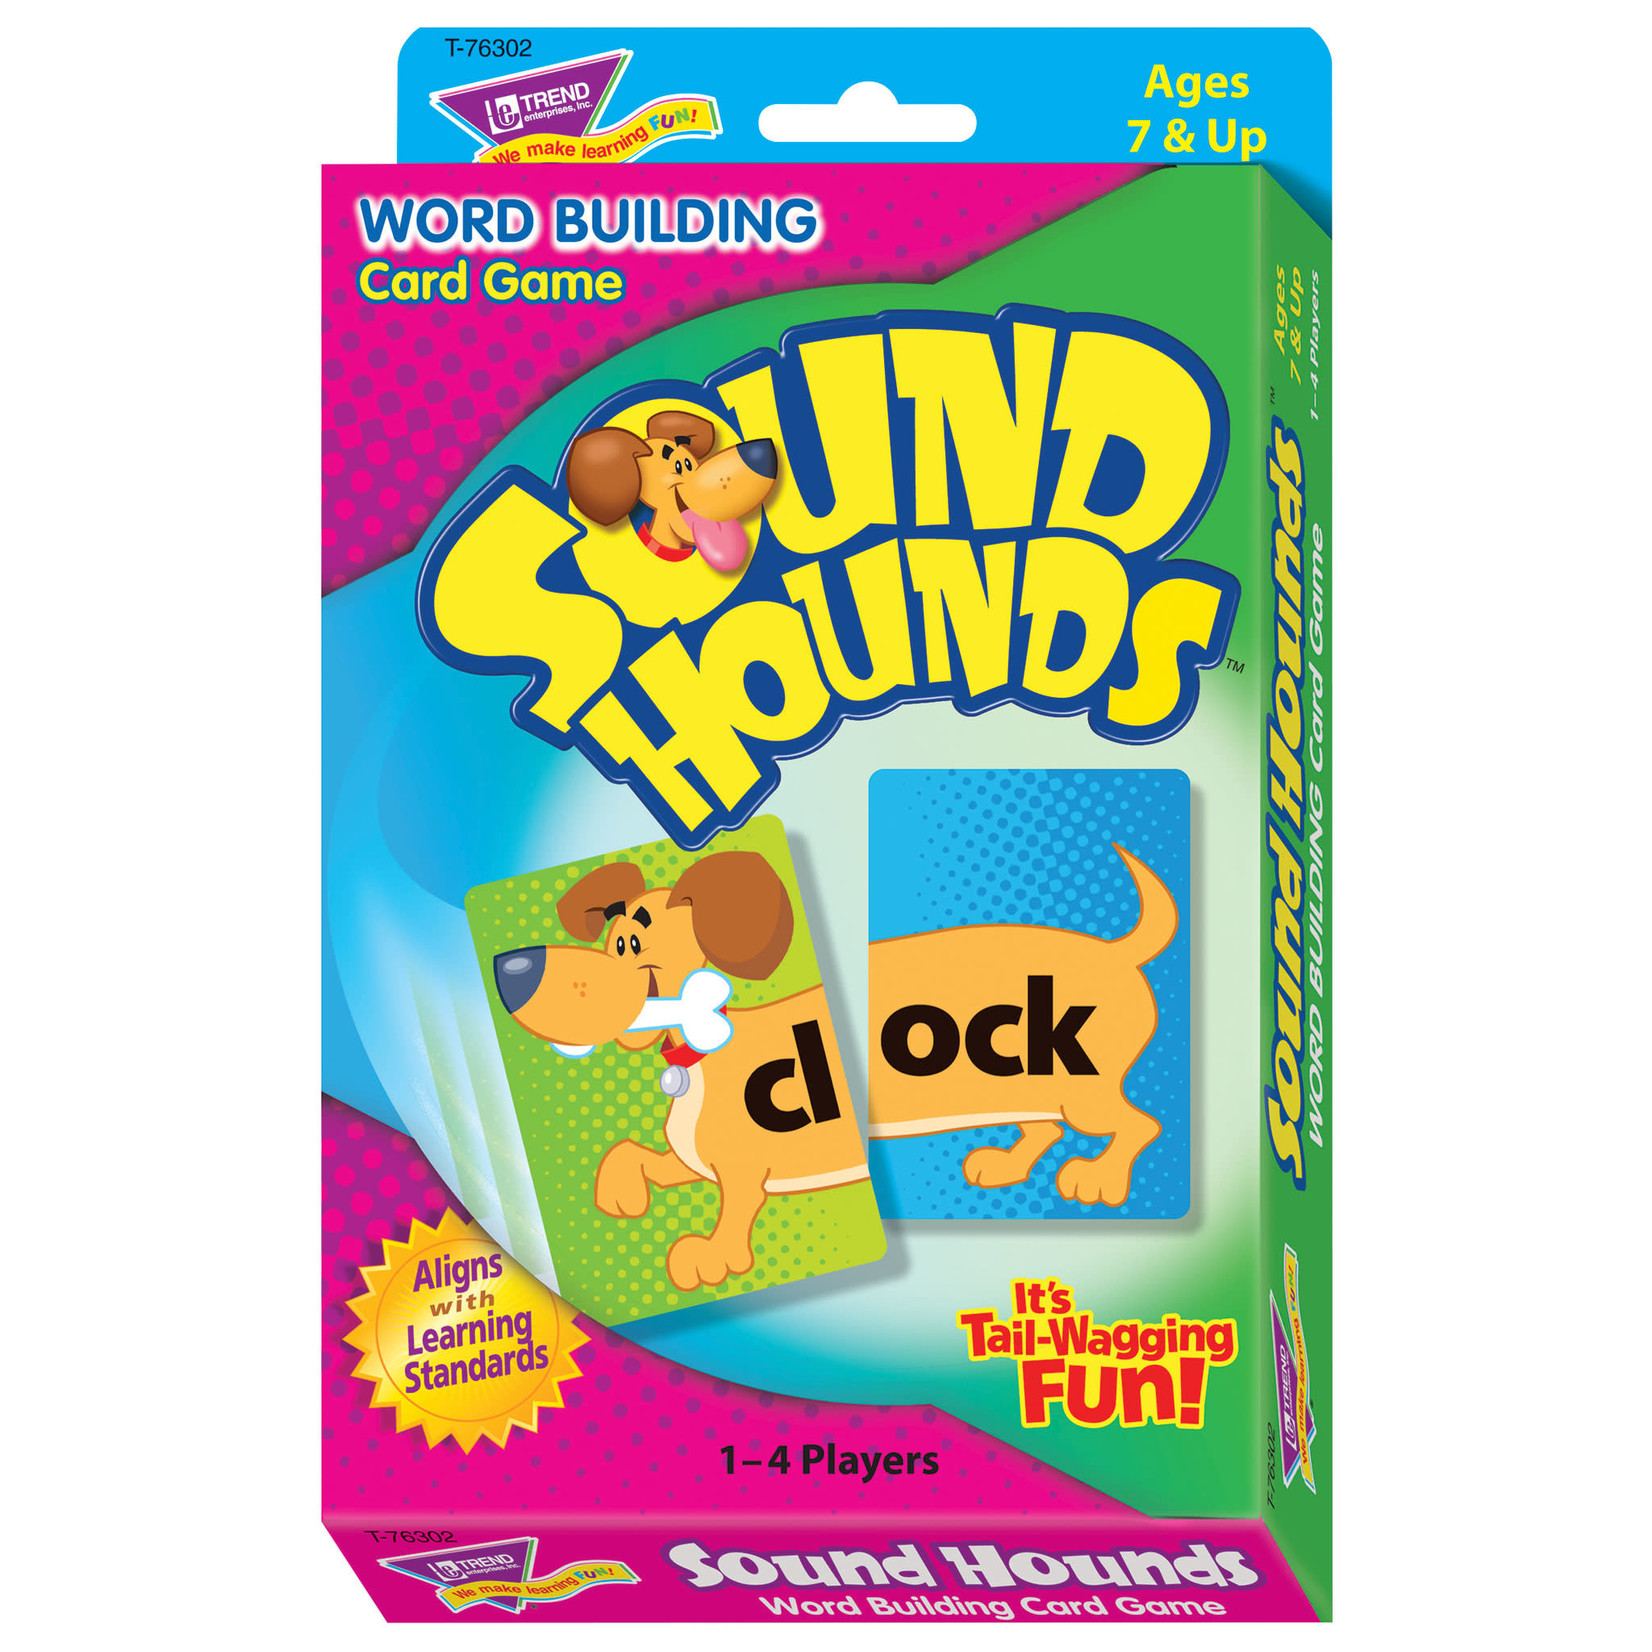 TREND Sound Hounds Game